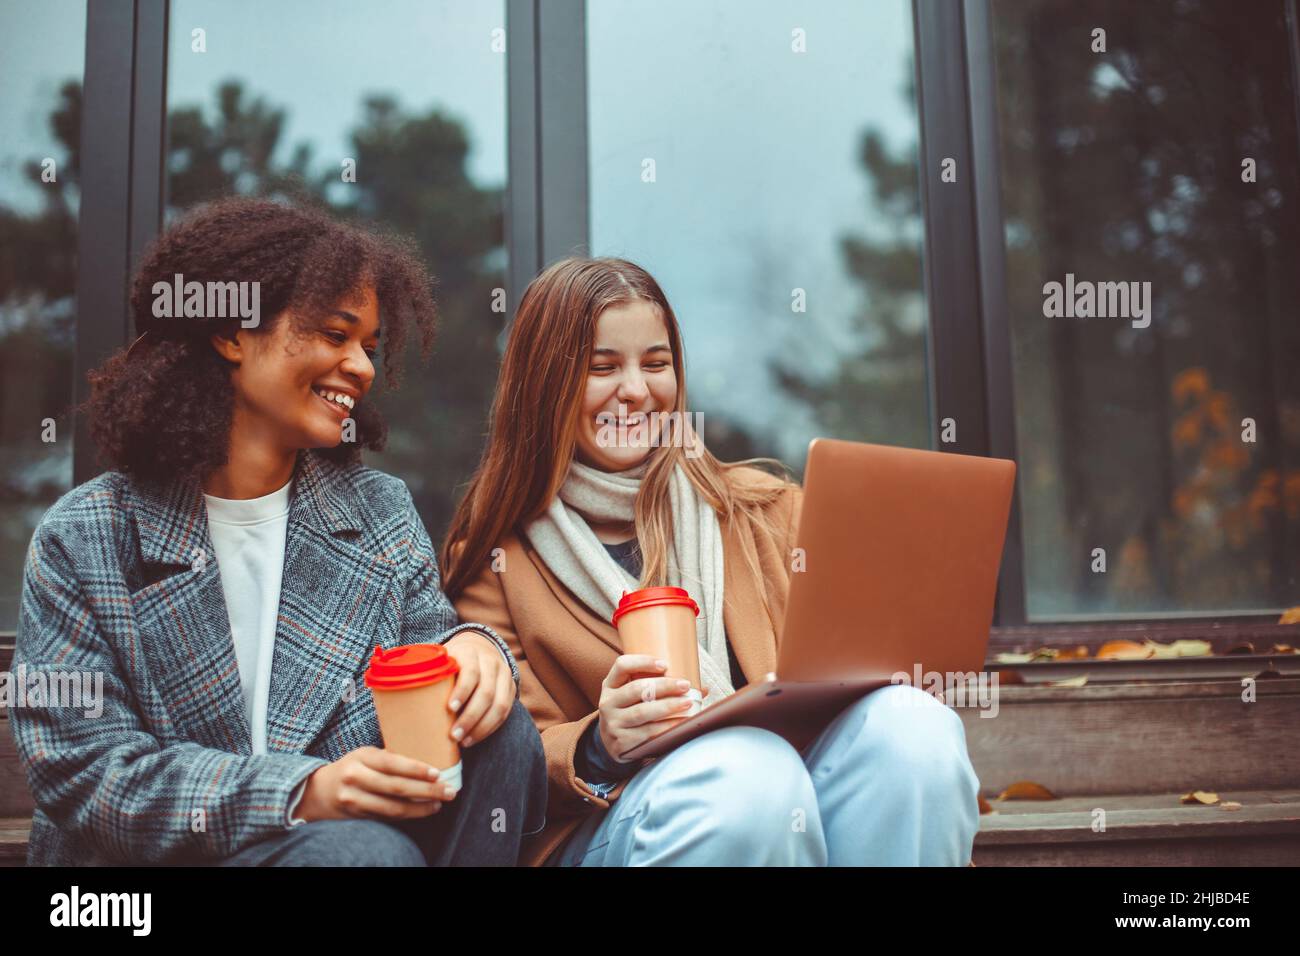 Two happy positive multi-ethnic teen girls with computer and drinking take away coffee outdoors, black and white female best friends looking at laptop Stock Photo